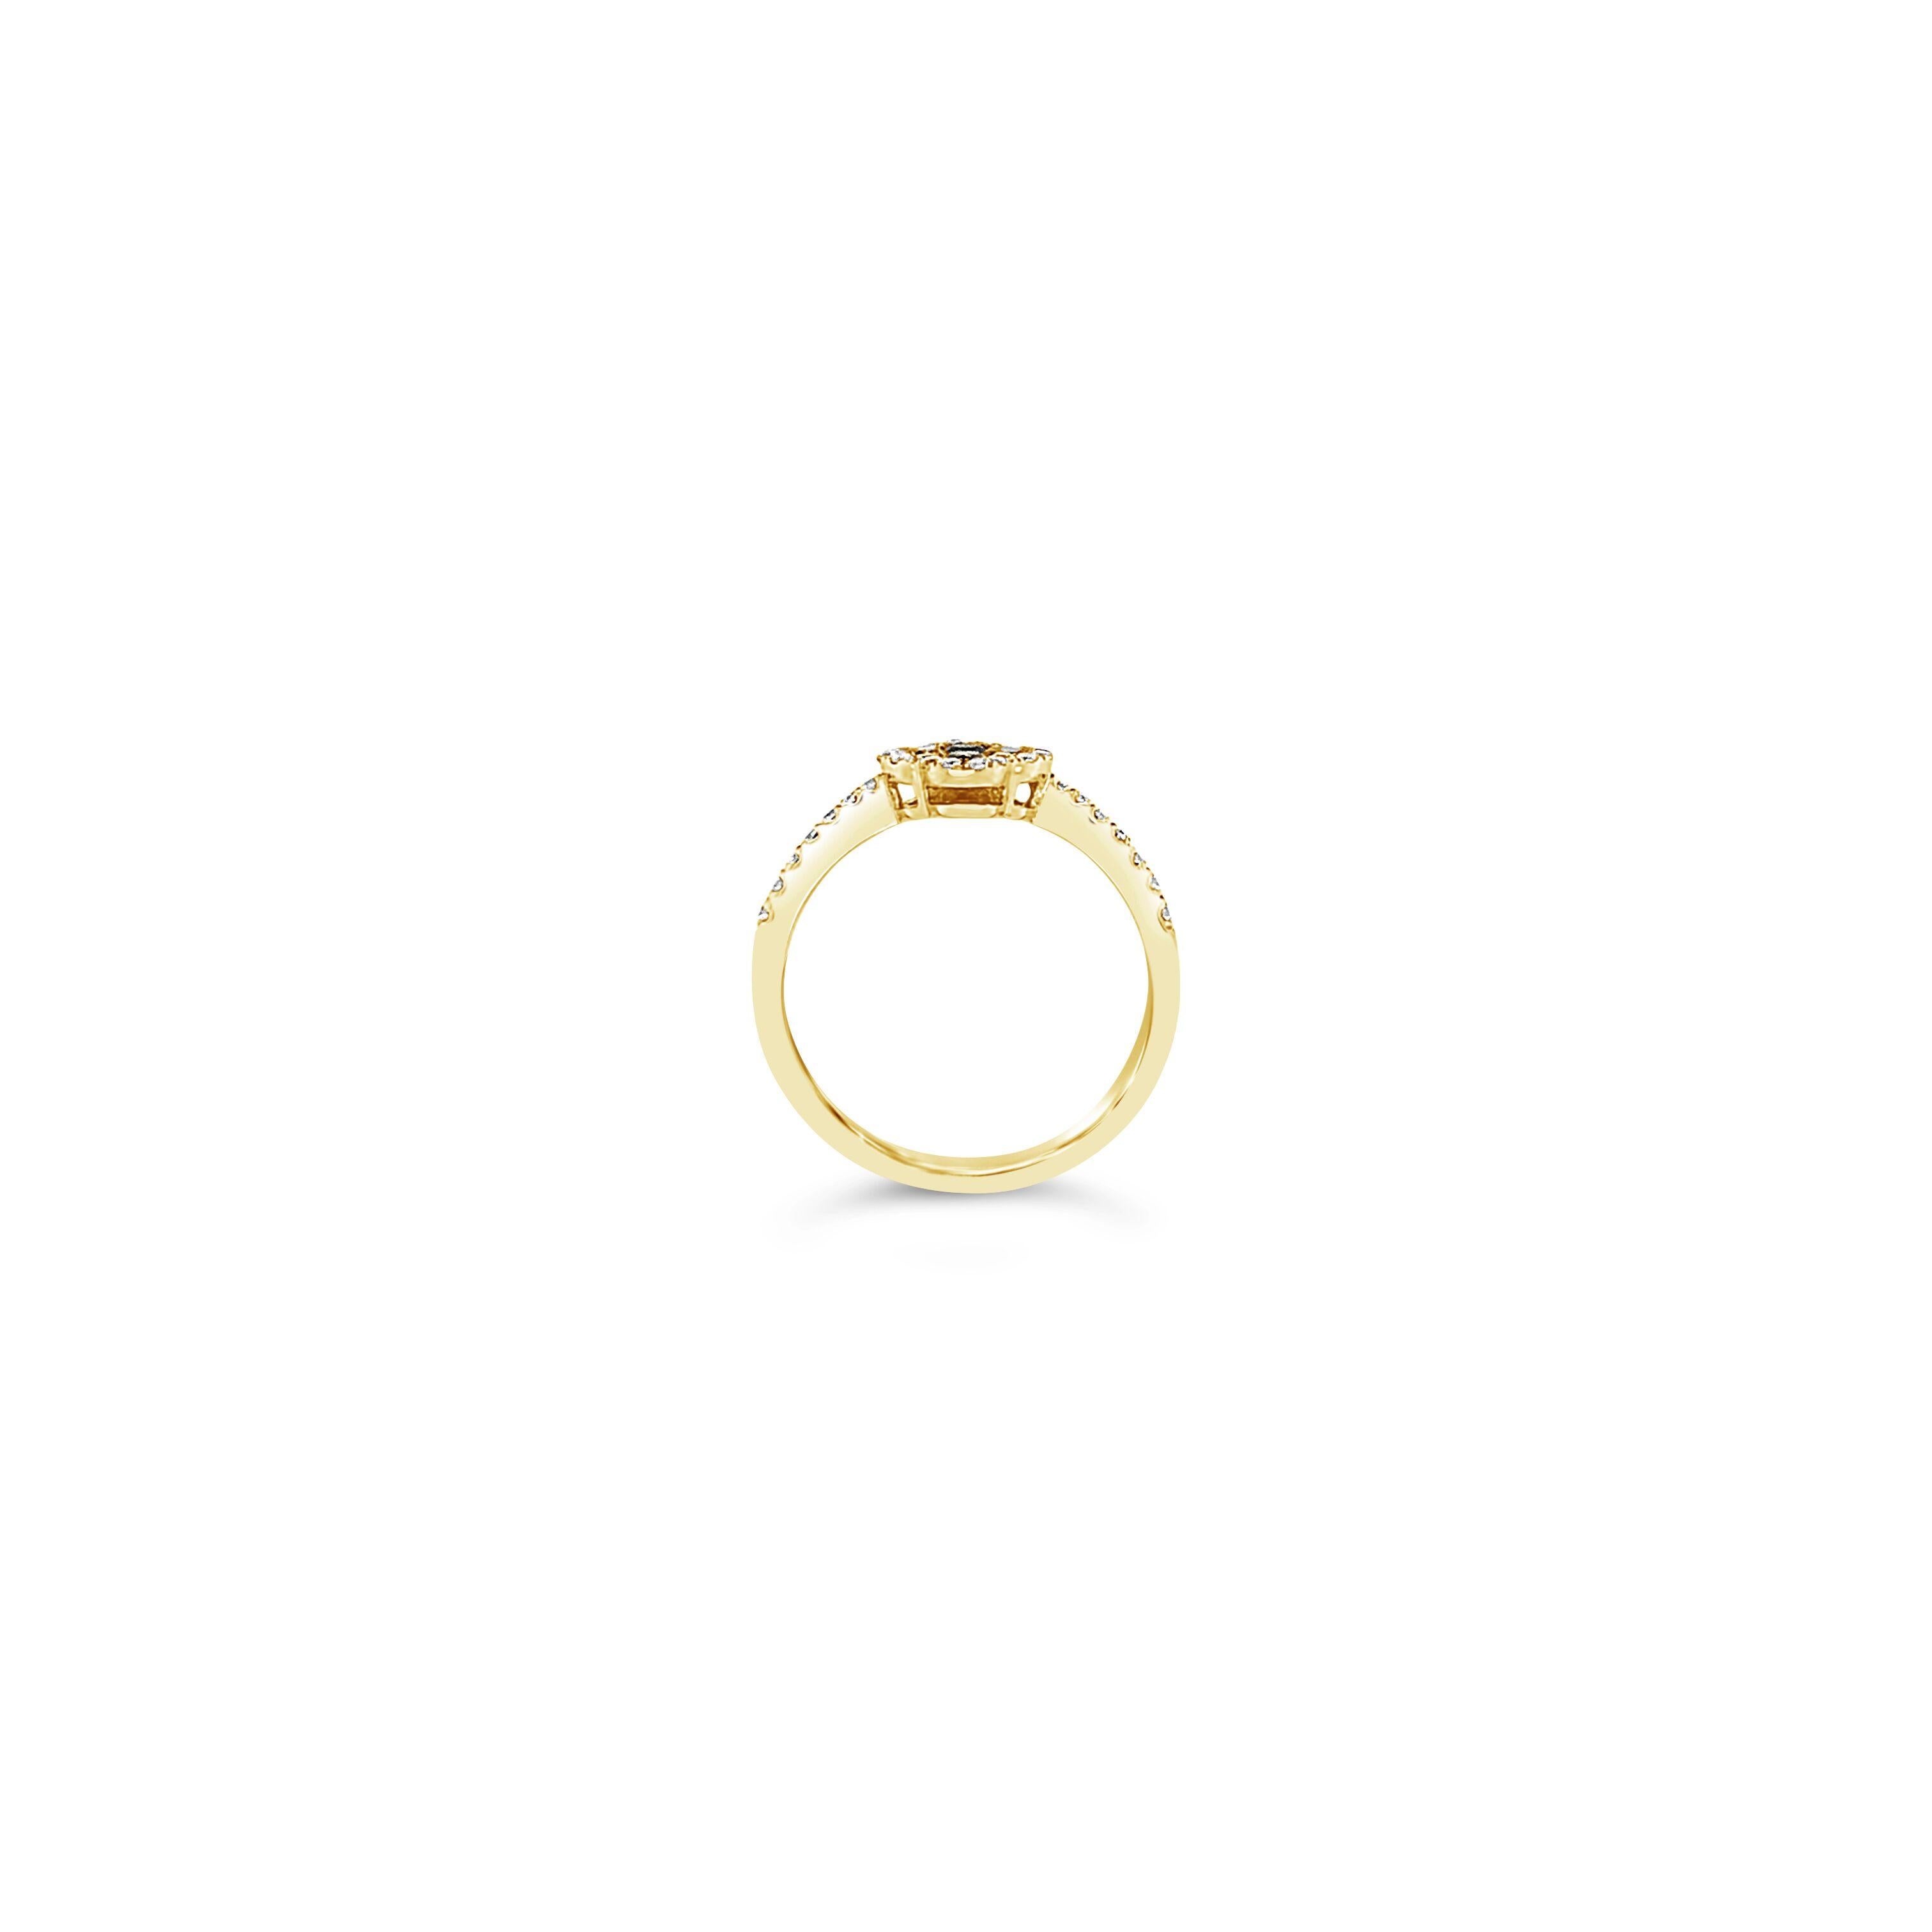 Le Vian Exotics® Ring featuring 1/20 cts. Yellow Diamonds, 1/10 cts. - Diamonds, 1/20 cts. Blue Diamonds, 1/4 cts. Vanilla Diamonds® set in 14K Honey Gold™

Ring Size: 6.5

Ring may or may not be sizable, please feel free to reach out with any